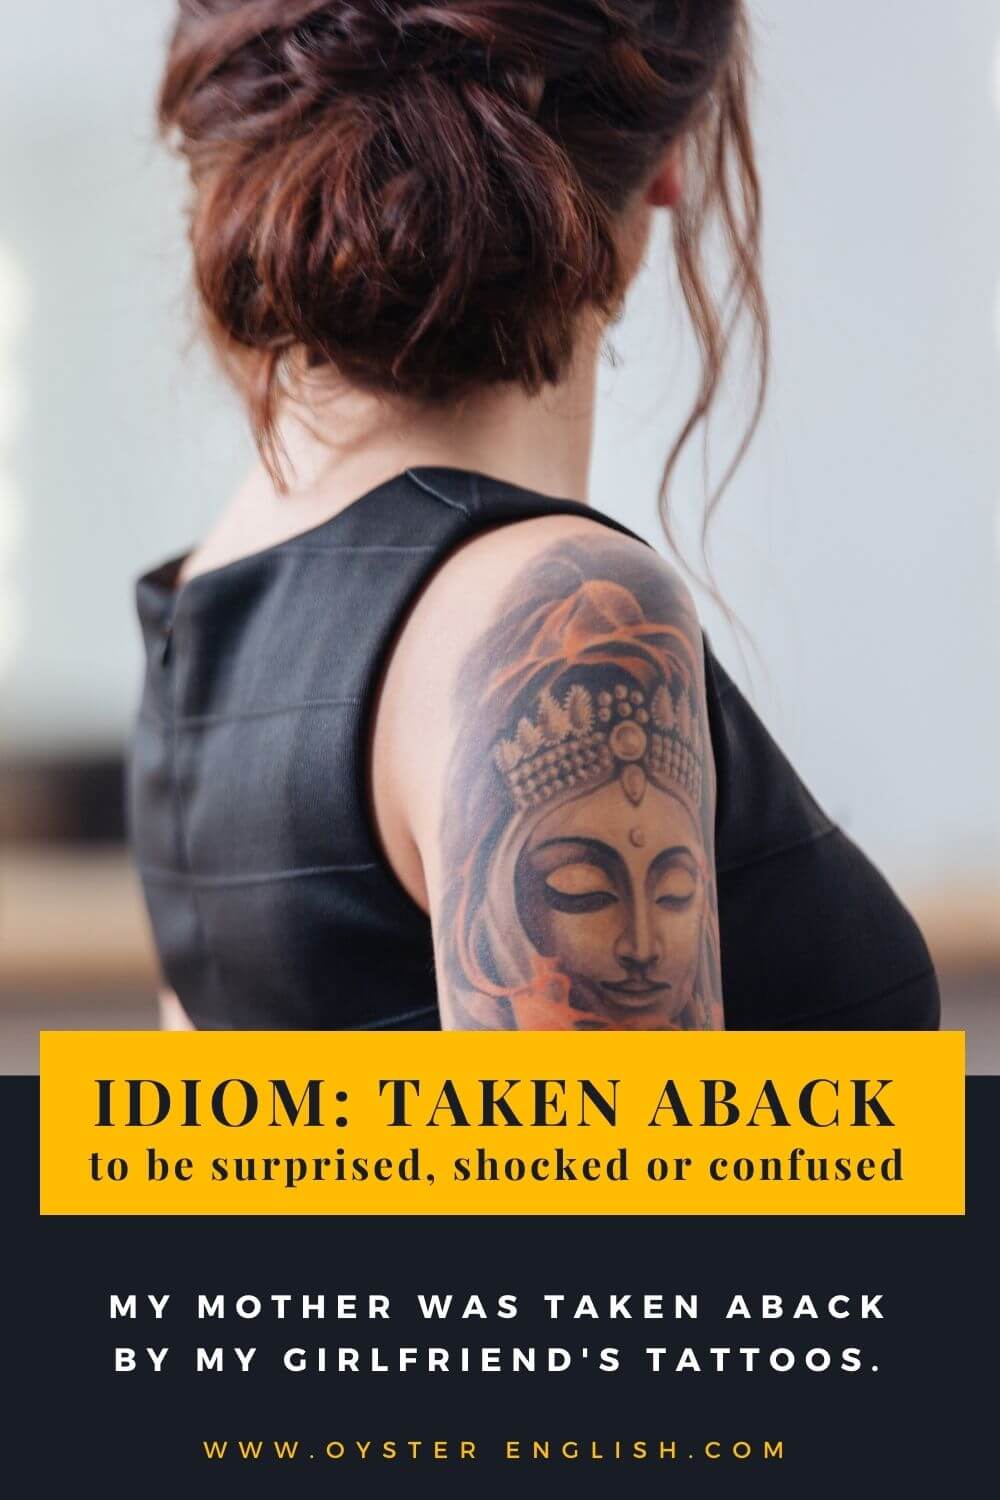 Picture of woman wearing a sleeveless dress with a large tattoo covering her harm to illustrate the idiom, "taken aback." Example given: My mother was taken aback by my girlfriend's tattoos.